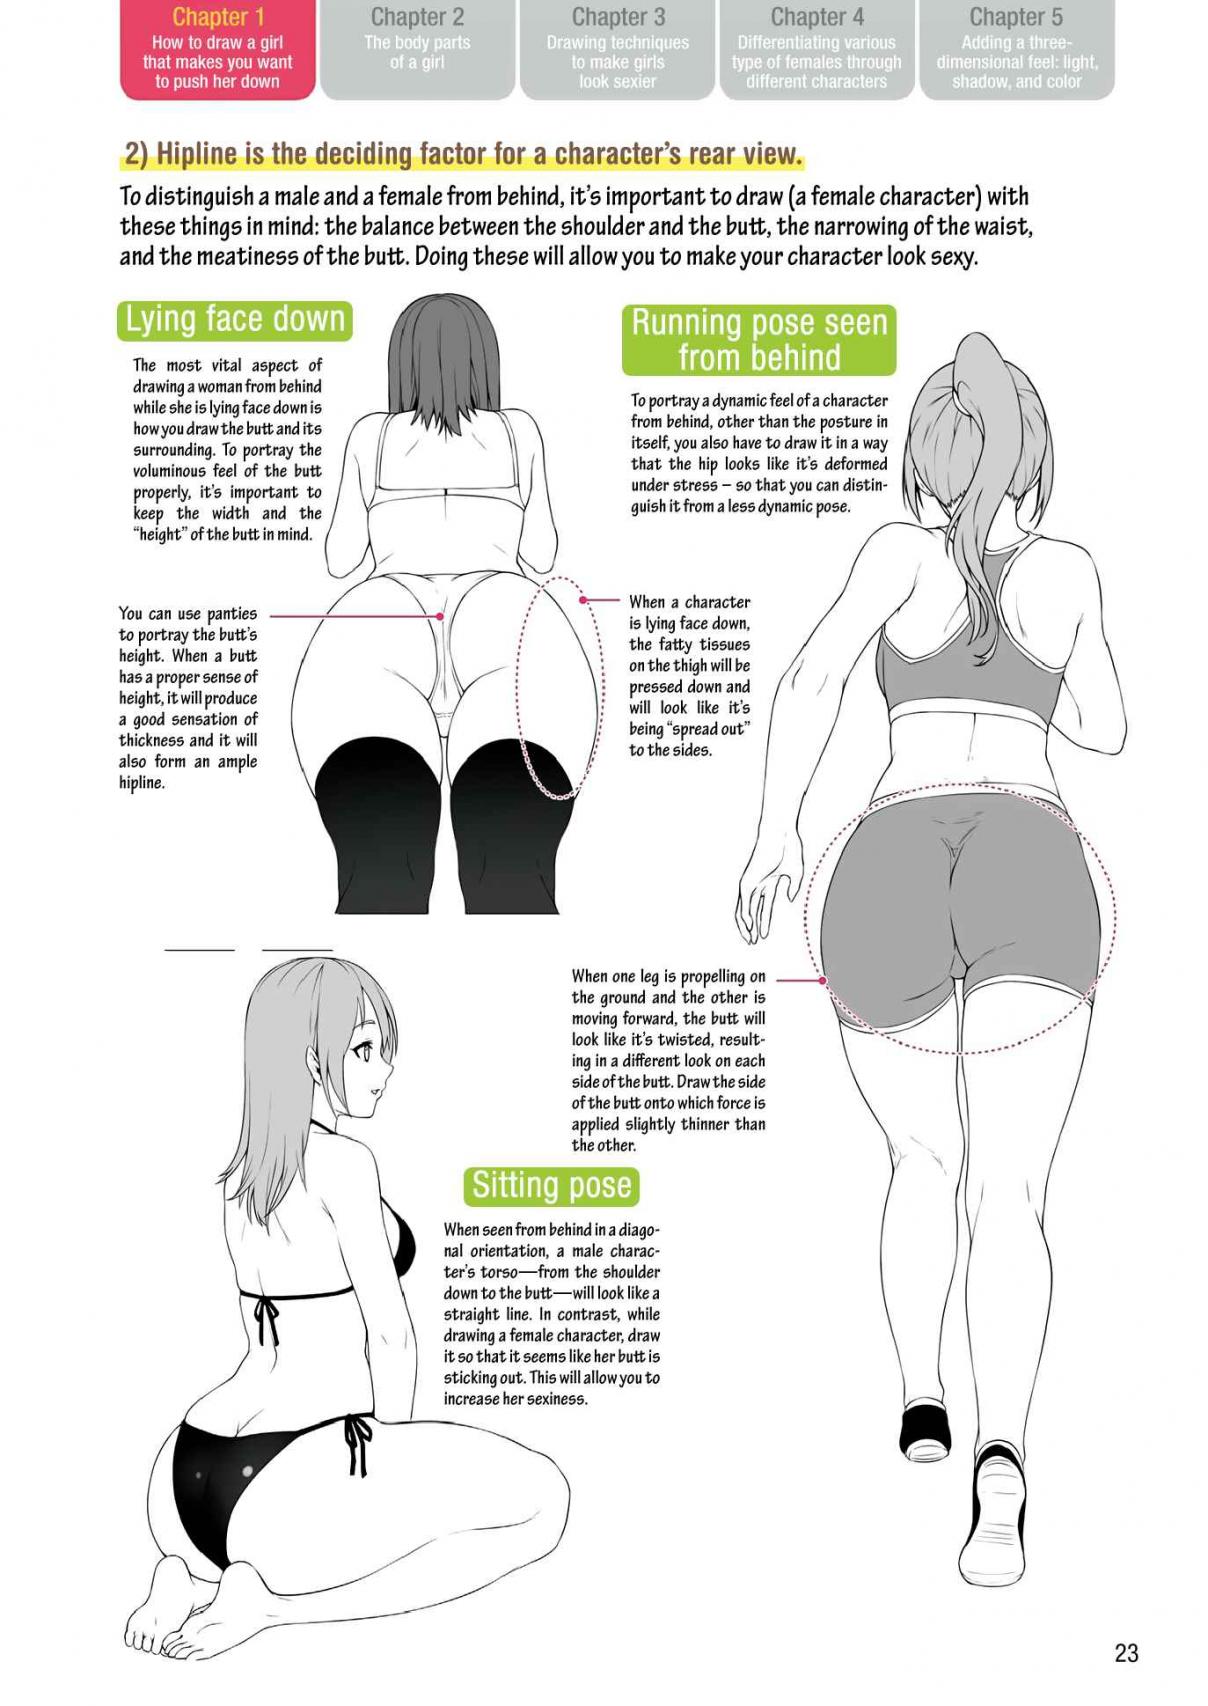 How to Draw a (Slightly) Sexy Girl Vol. 1 Ch. 1 How To Draw a Girl that Makes You Want to Push Her Down